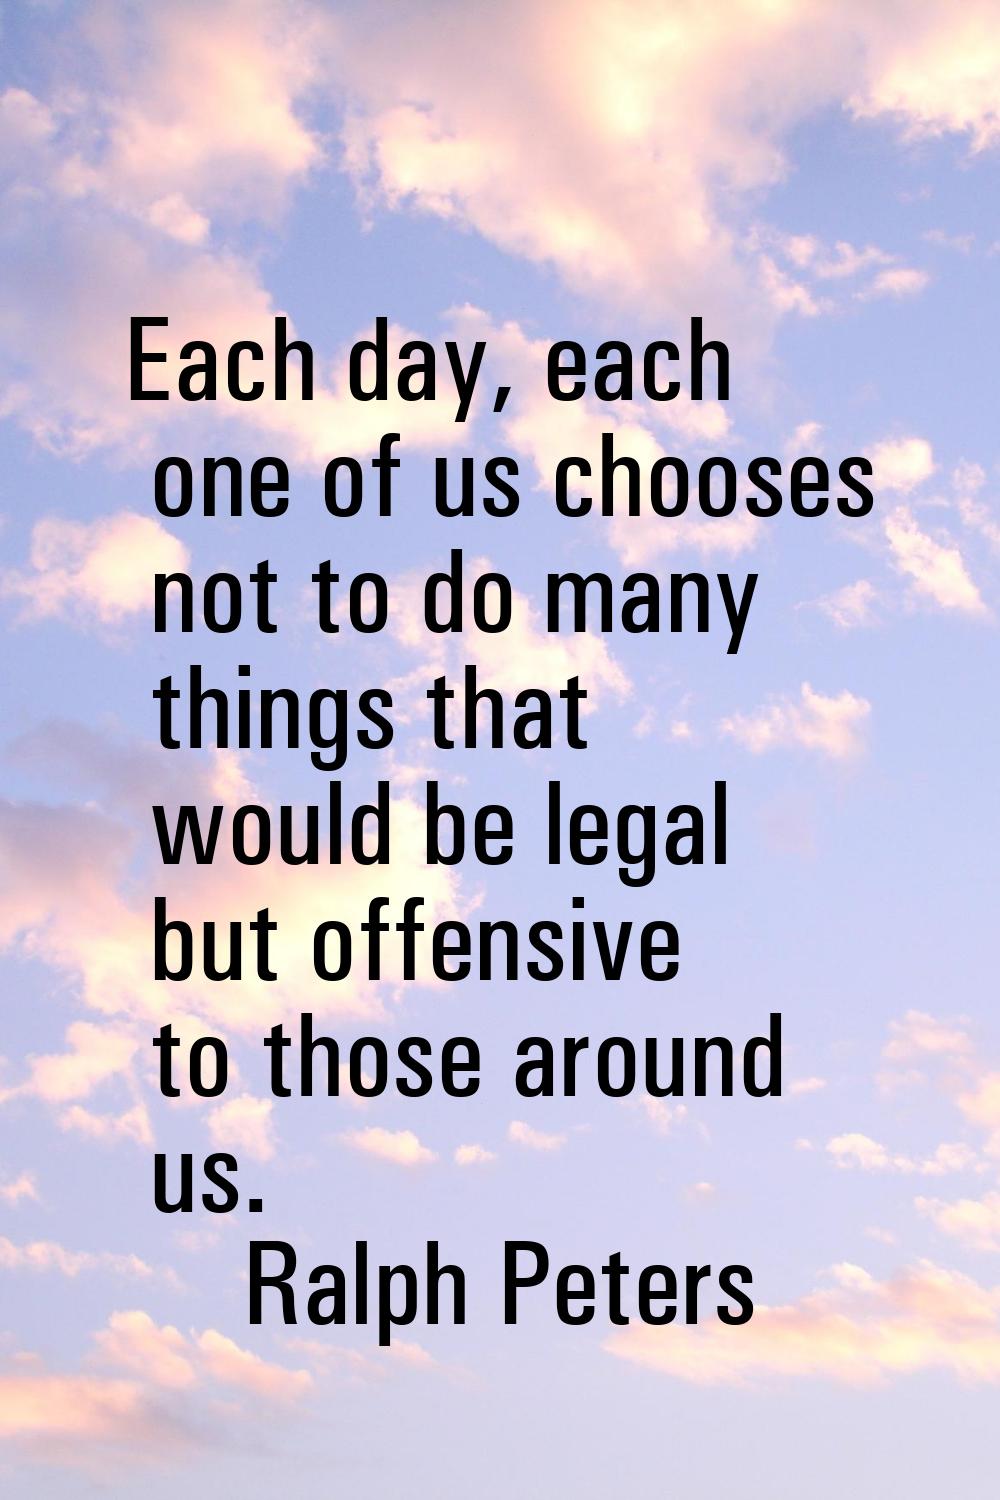 Each day, each one of us chooses not to do many things that would be legal but offensive to those a